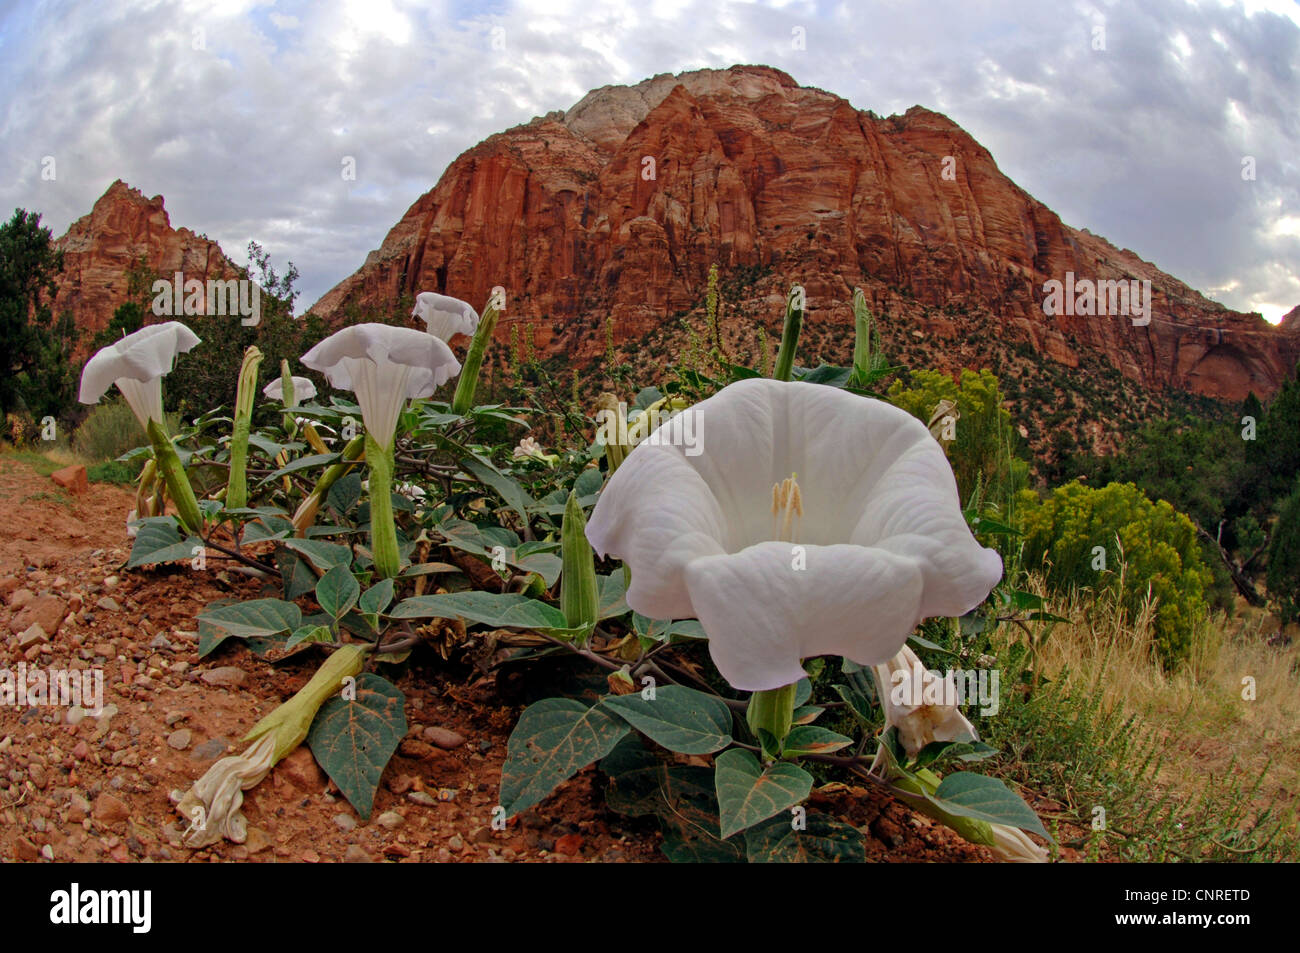 moonflower (Datura meteloides), blooming in front of rocks in the Zion National Park, USA, Utah Stock Photo